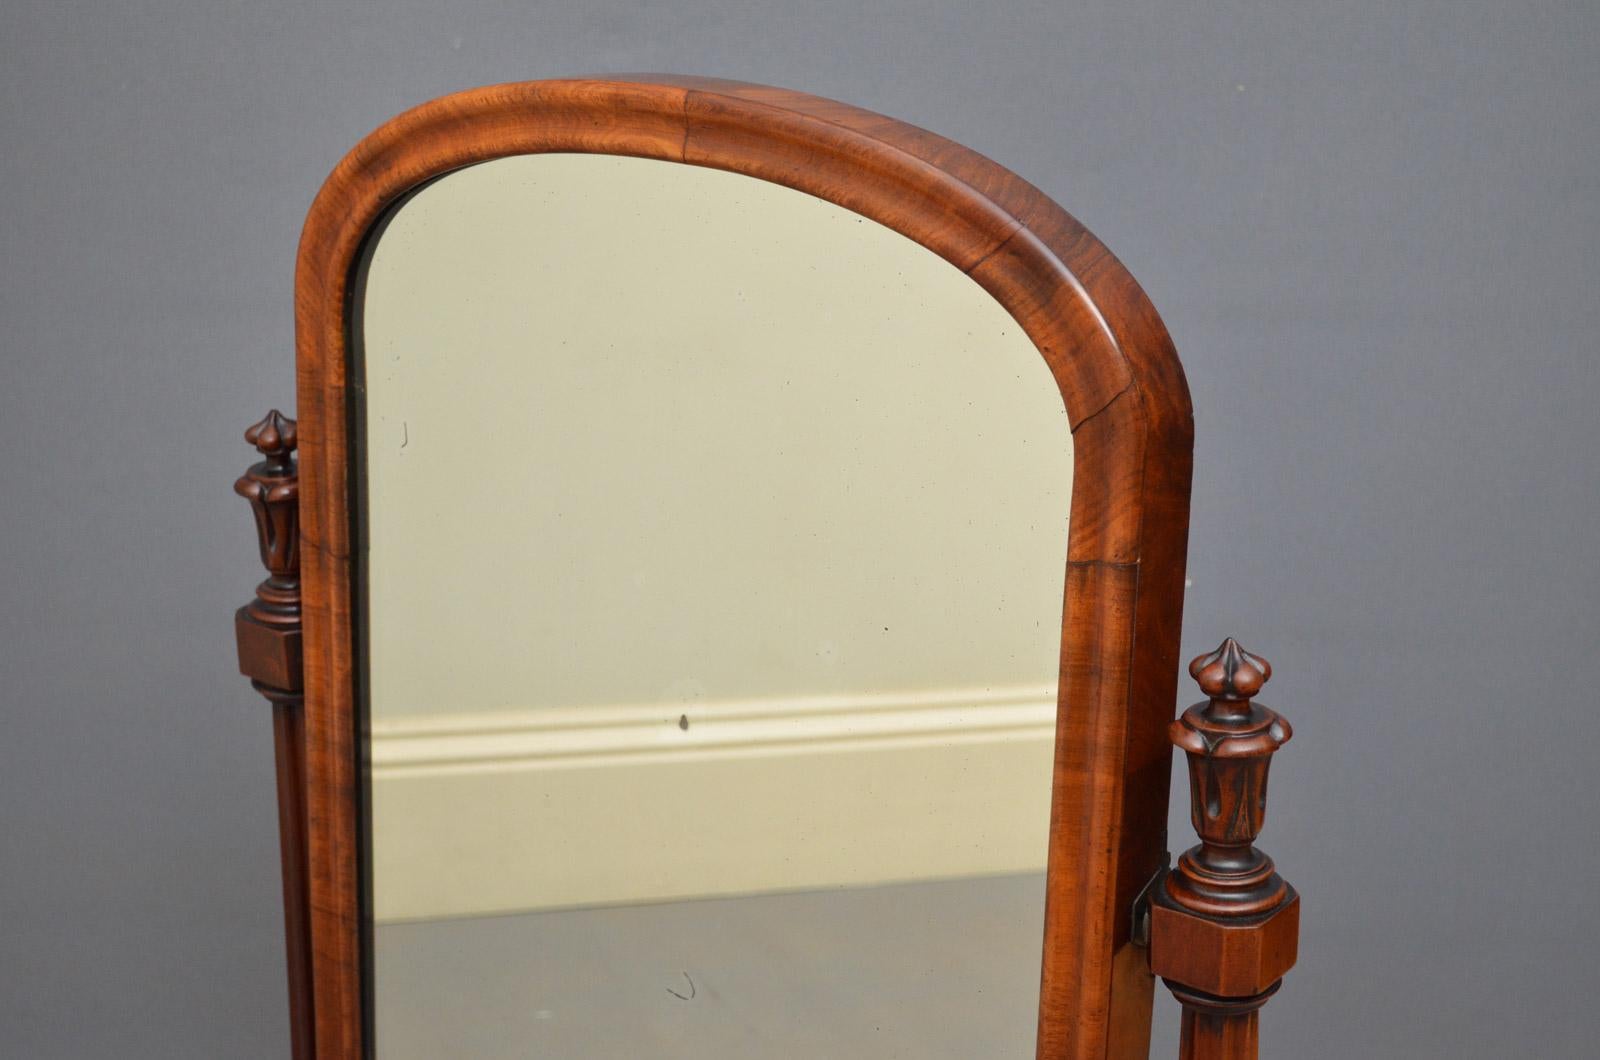 Sn4515, attractive early Victorian toilet mirror, having original mirror plate with some foxing in moulded frame and finely carved and fluted supports terminating in carved feet.
This antique mirror is in excellent home ready condition, circa